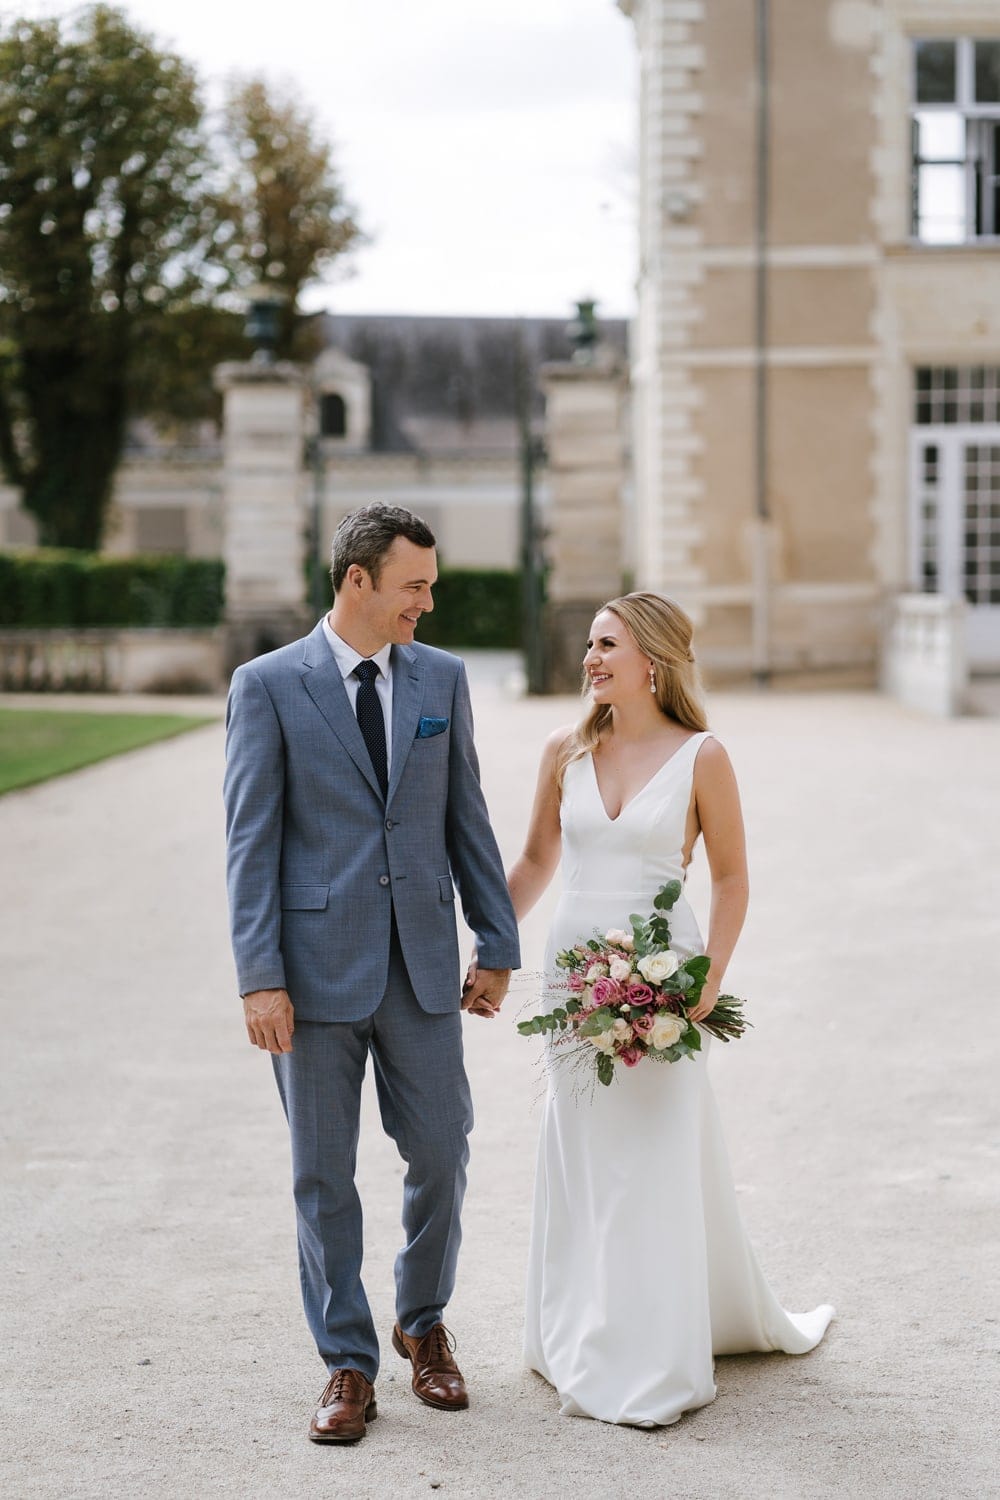 Oheka Castle Wedding Guide Everything You Need to Know